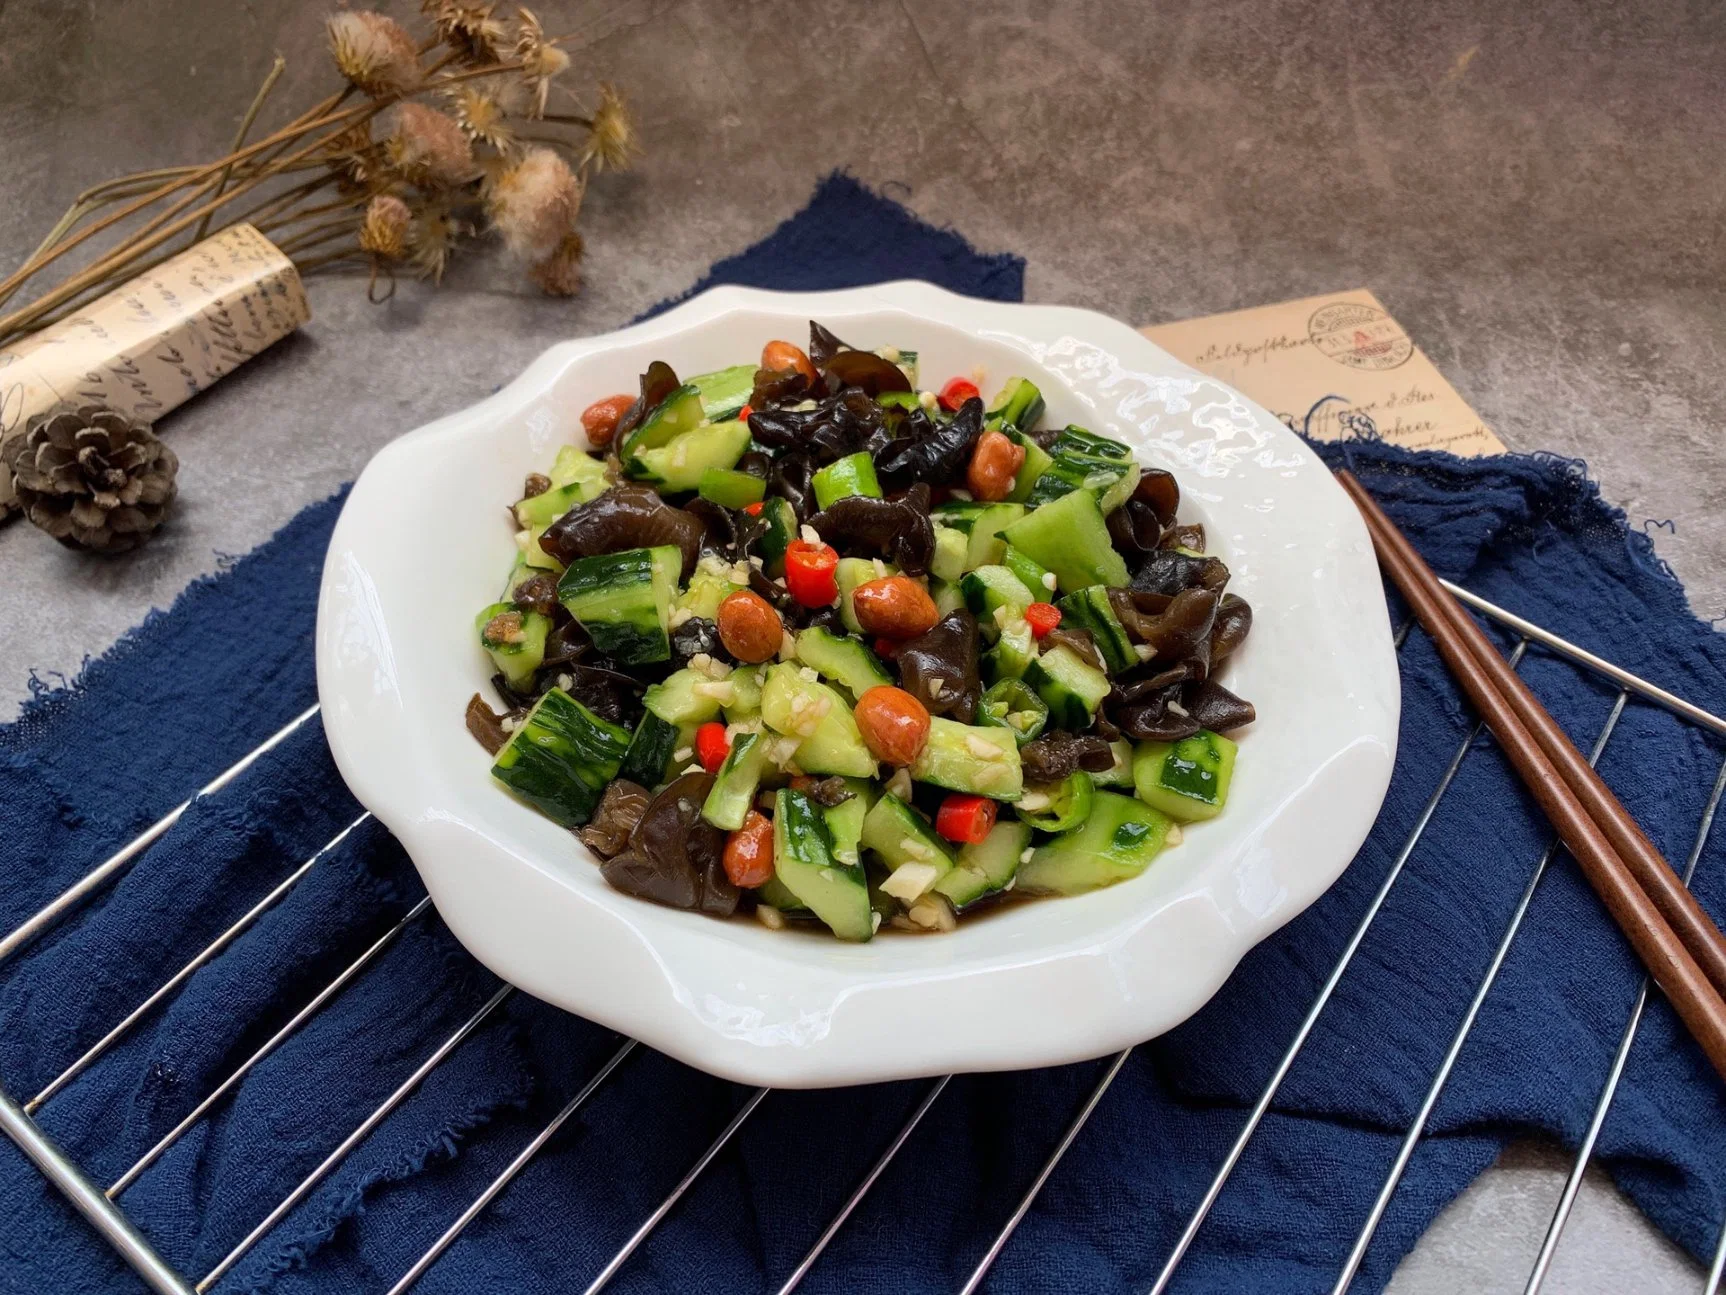 Good Edible Dried Black Fungus with Healthy Benefits